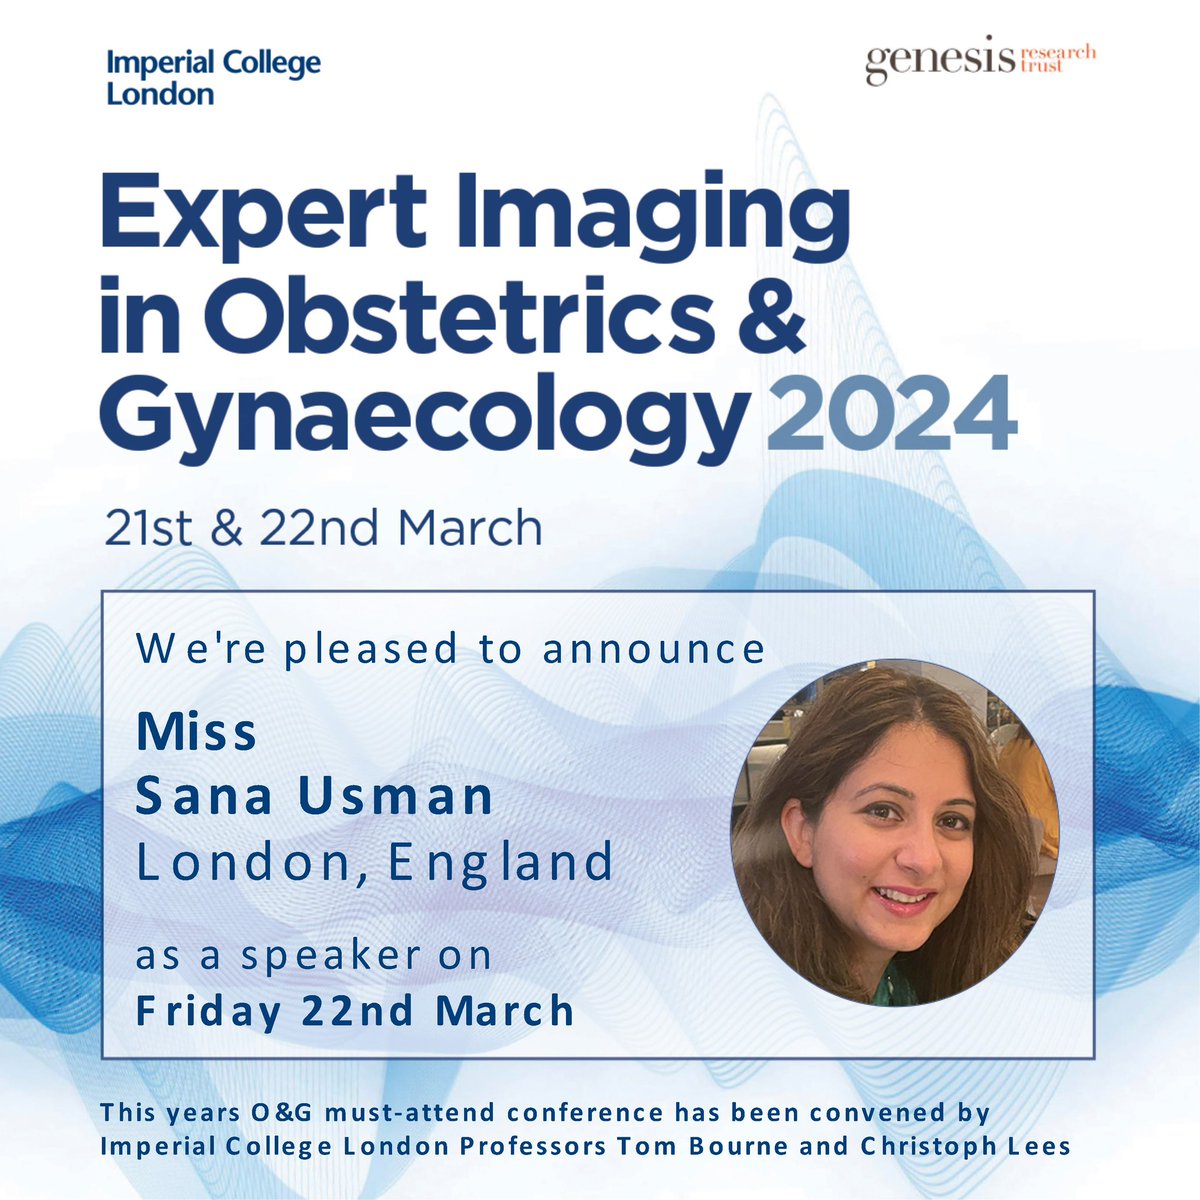 @DrSanaUsman, Consultant Obstetrician & Maternal Fetal Medicine Subspecialist at Birmingham Hospital & Honorary Consultant at @imperialcollege, shares insights on #Intrapartum #Ultrasound & labour outcome prediction modelling. Exciting developments in #Obstetrics at #EIOG24